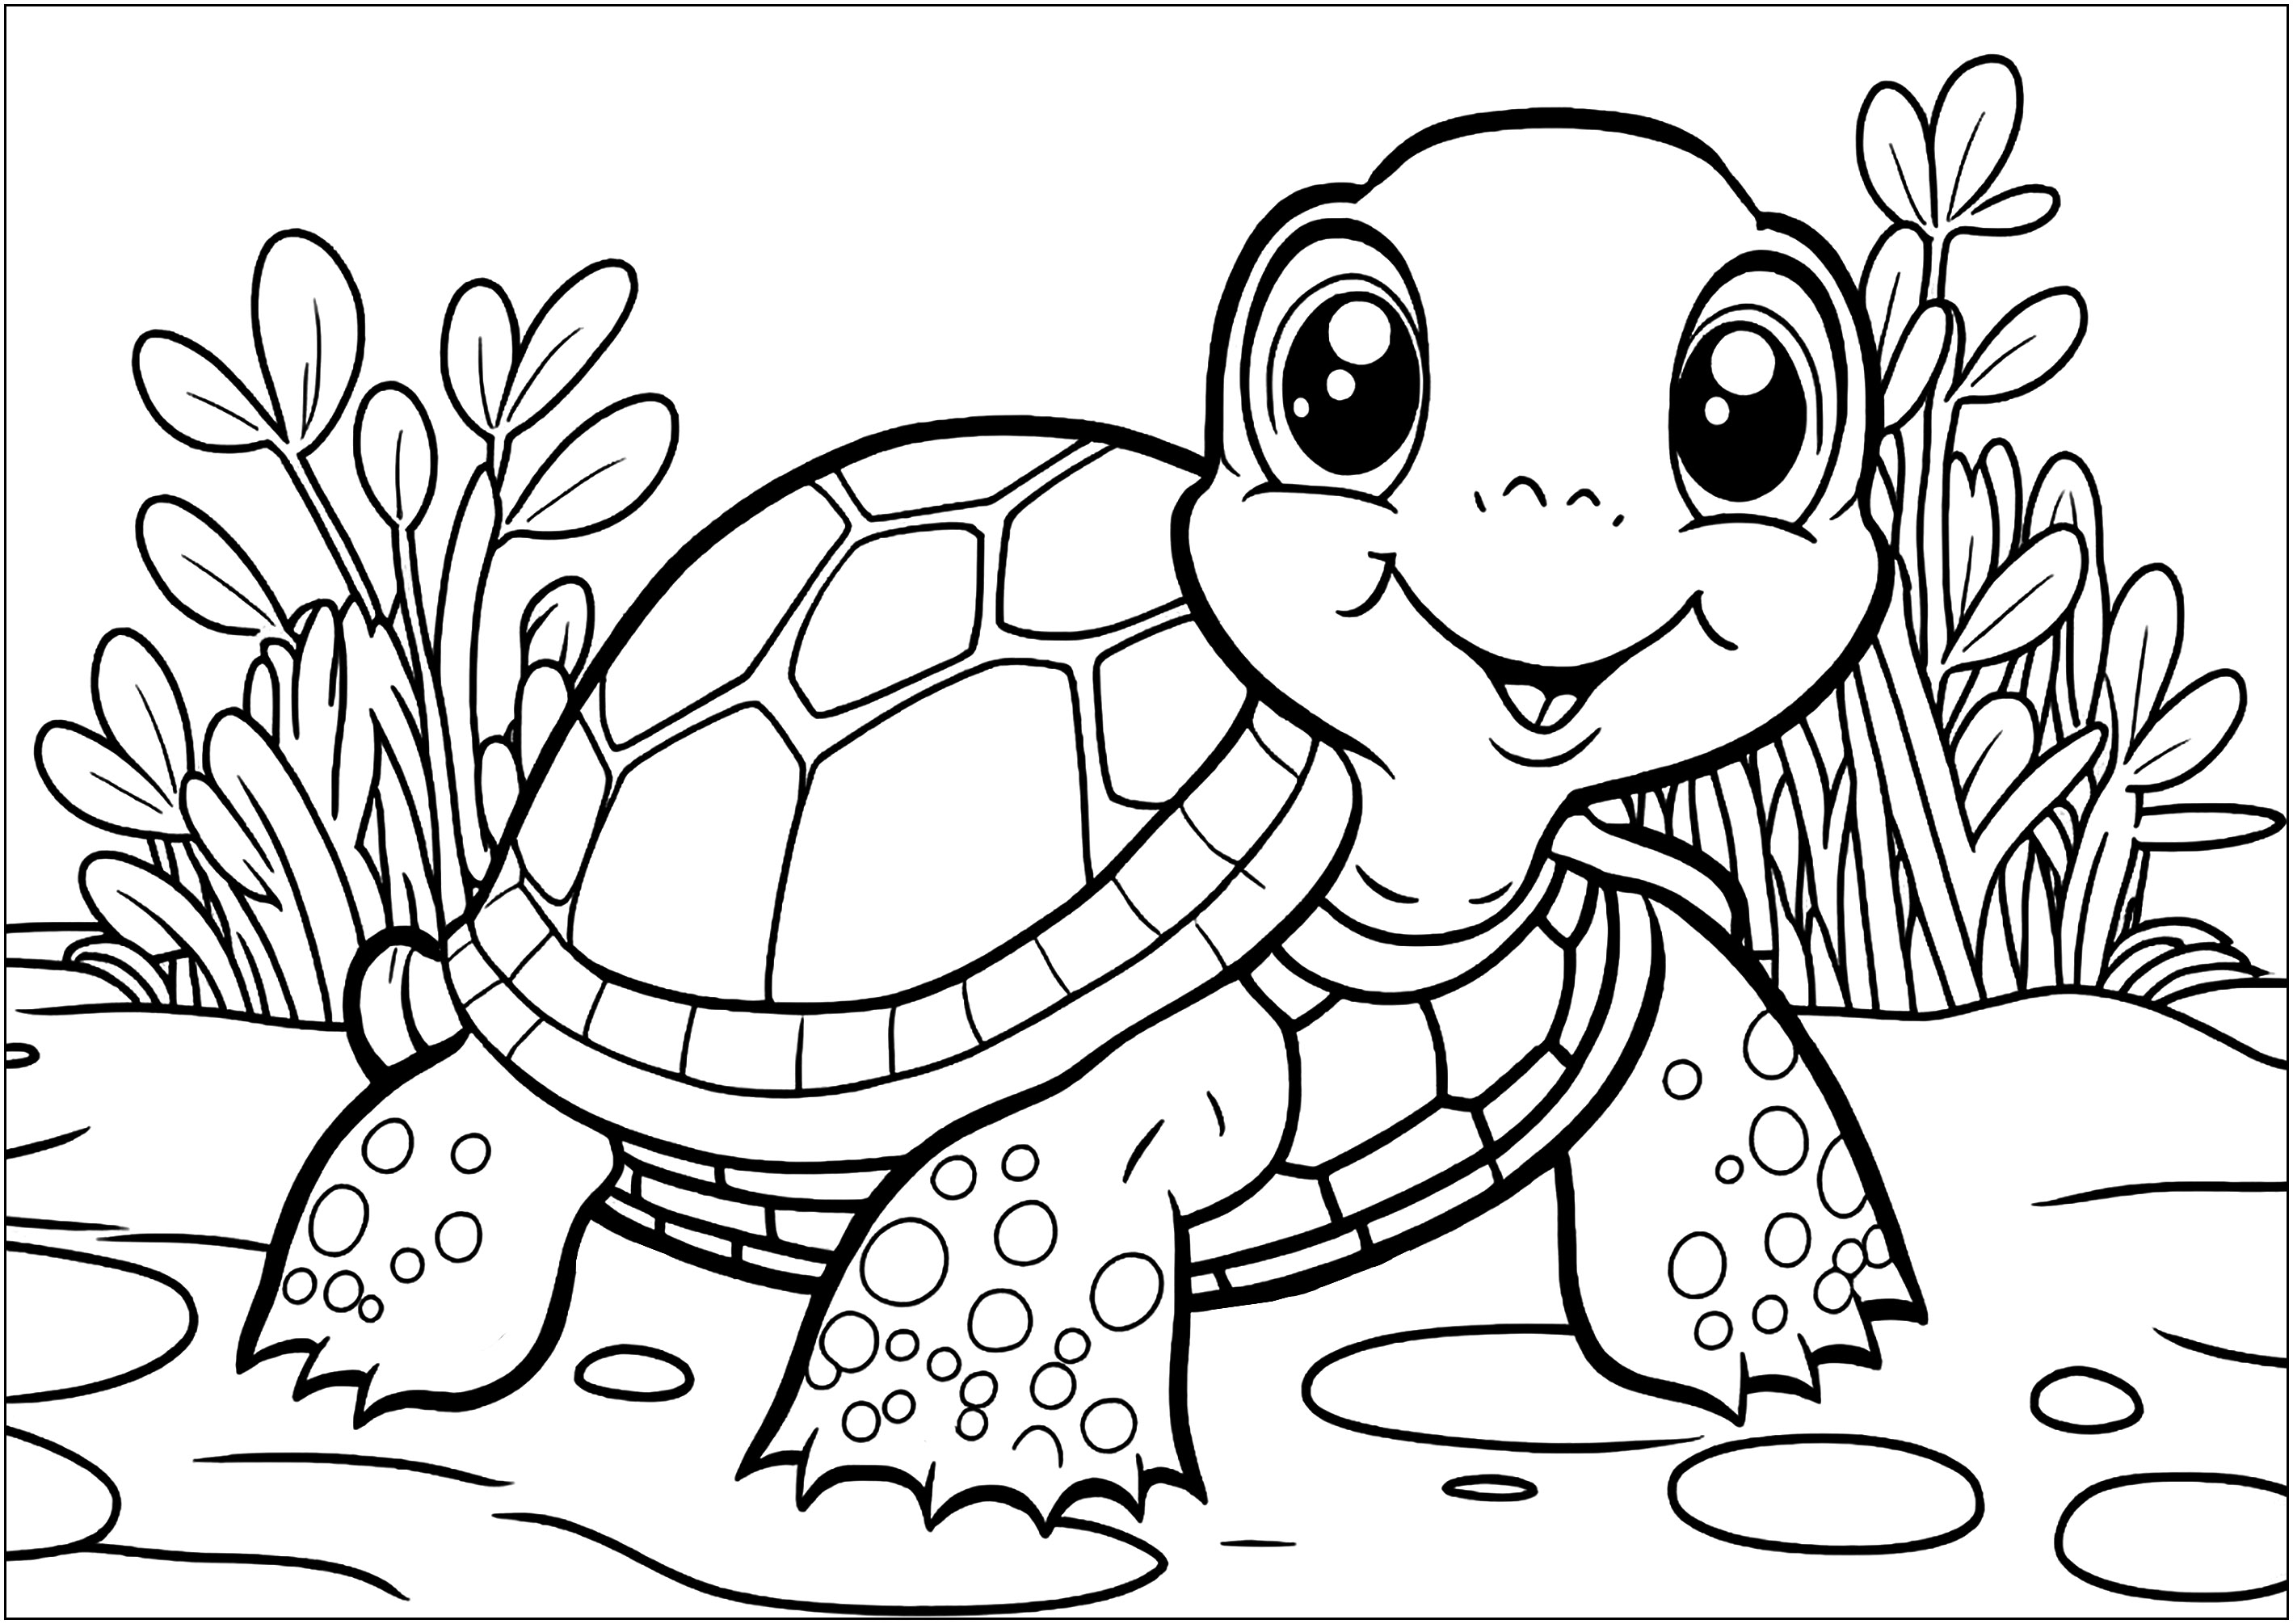 Smiling turtle - Turtles Kids Coloring Pages